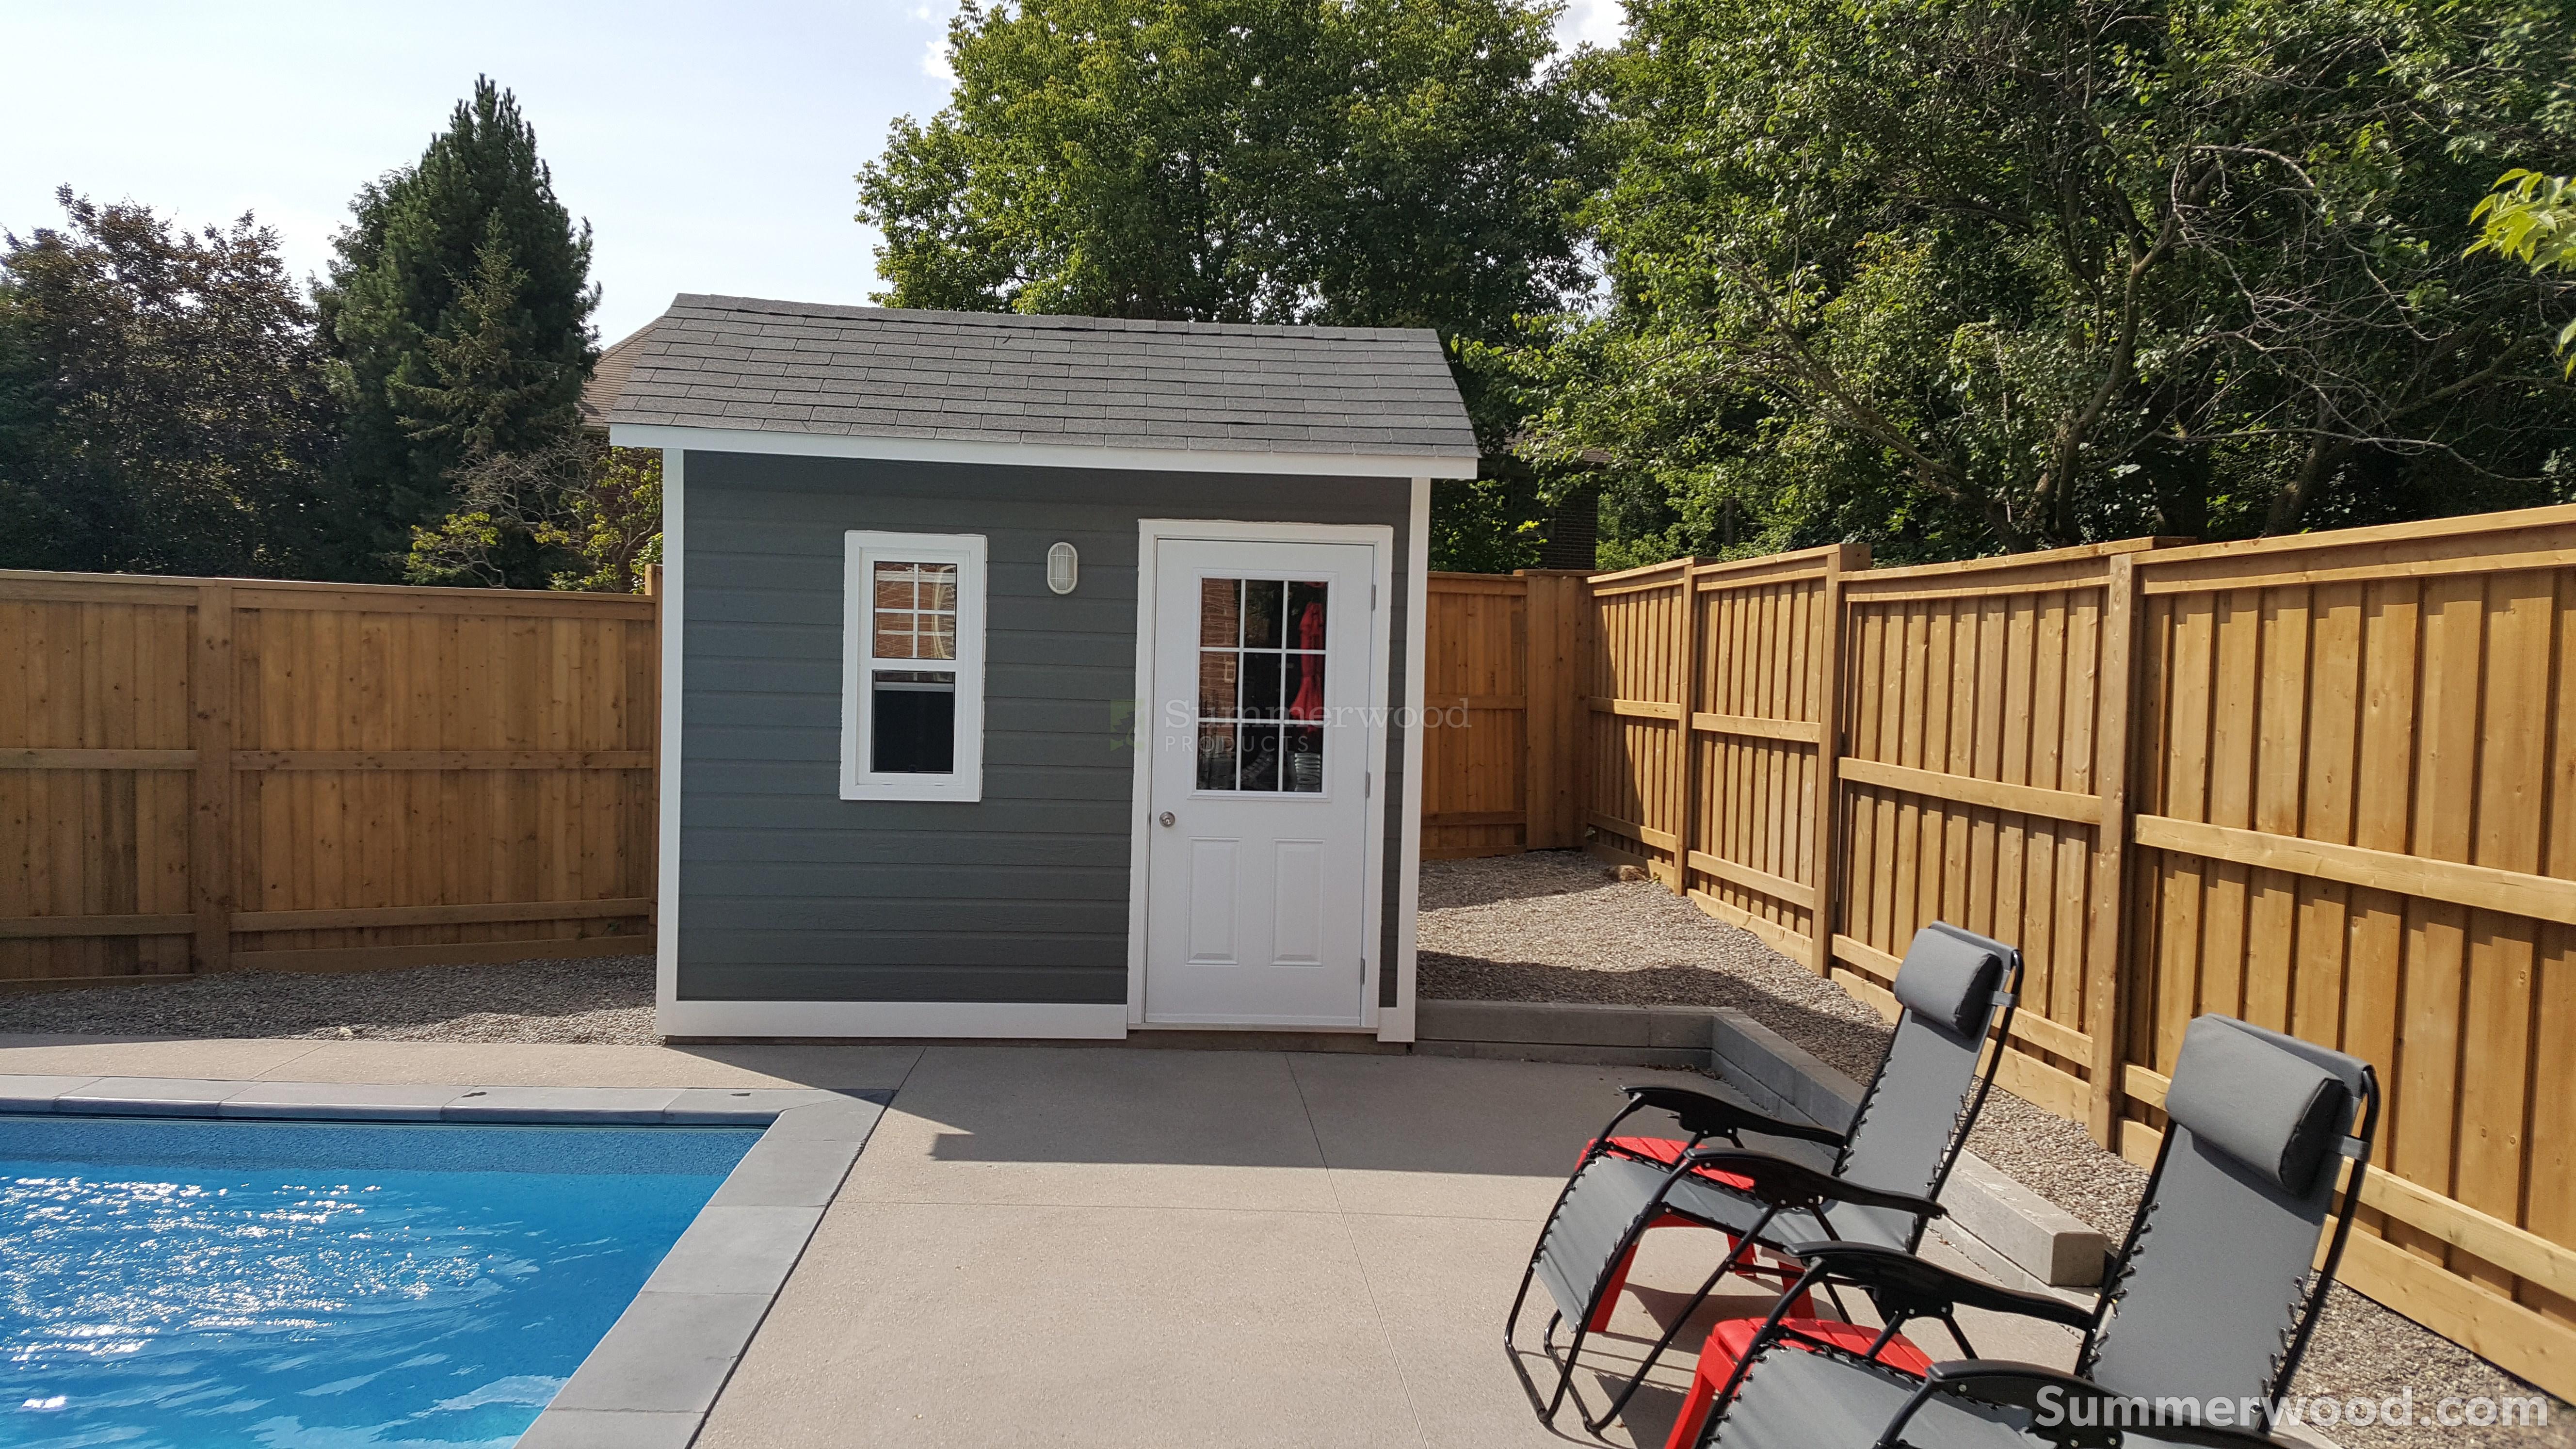 Canexel Palmerston 6x10 pool house with single hung window in Woodbridge, ON. ID number 217743-2